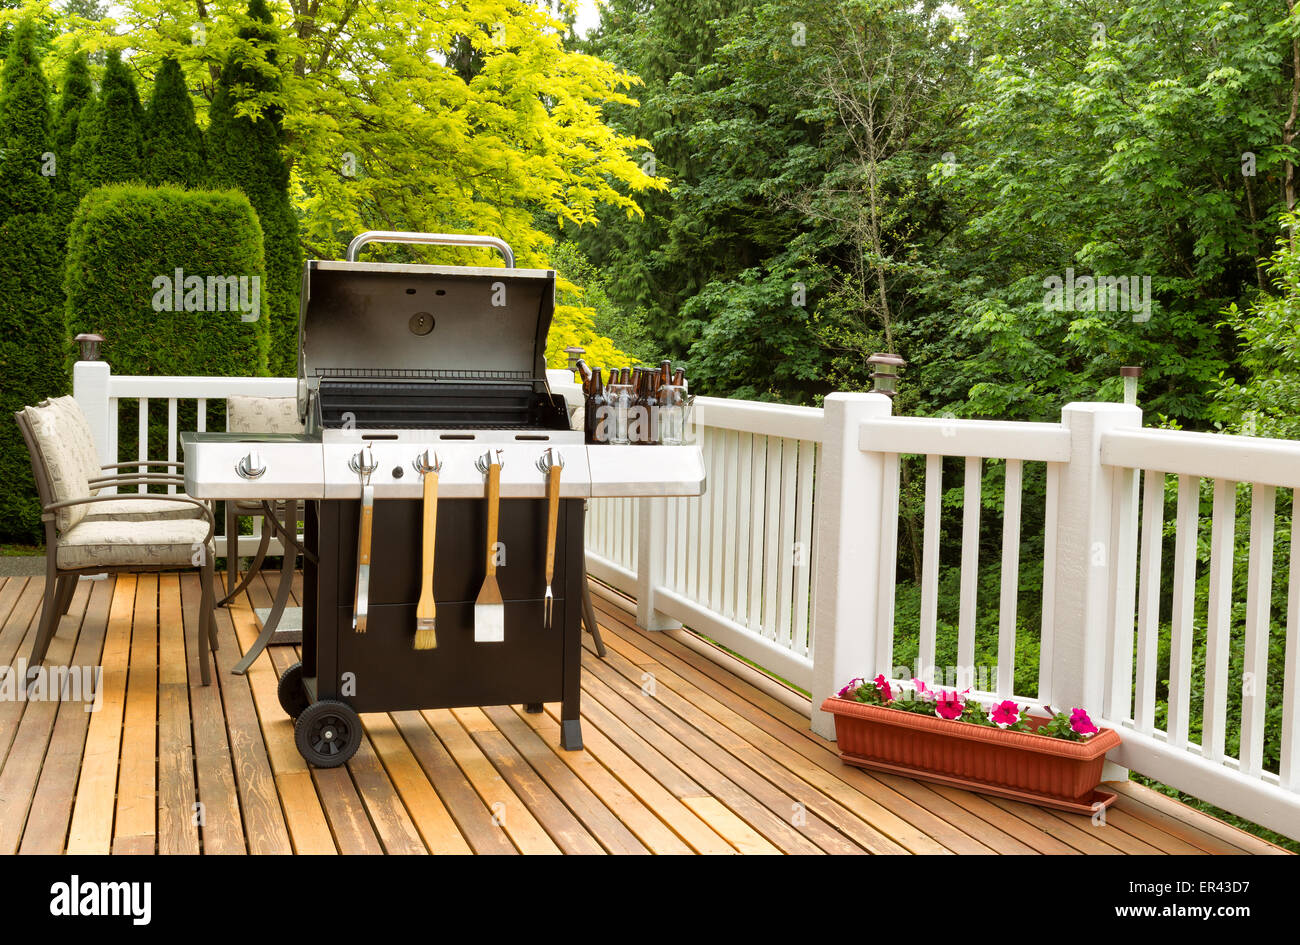 Photo of a clean barbecue cooker with cookware and cold beer in bucket on cedar wood patio. Stock Photo